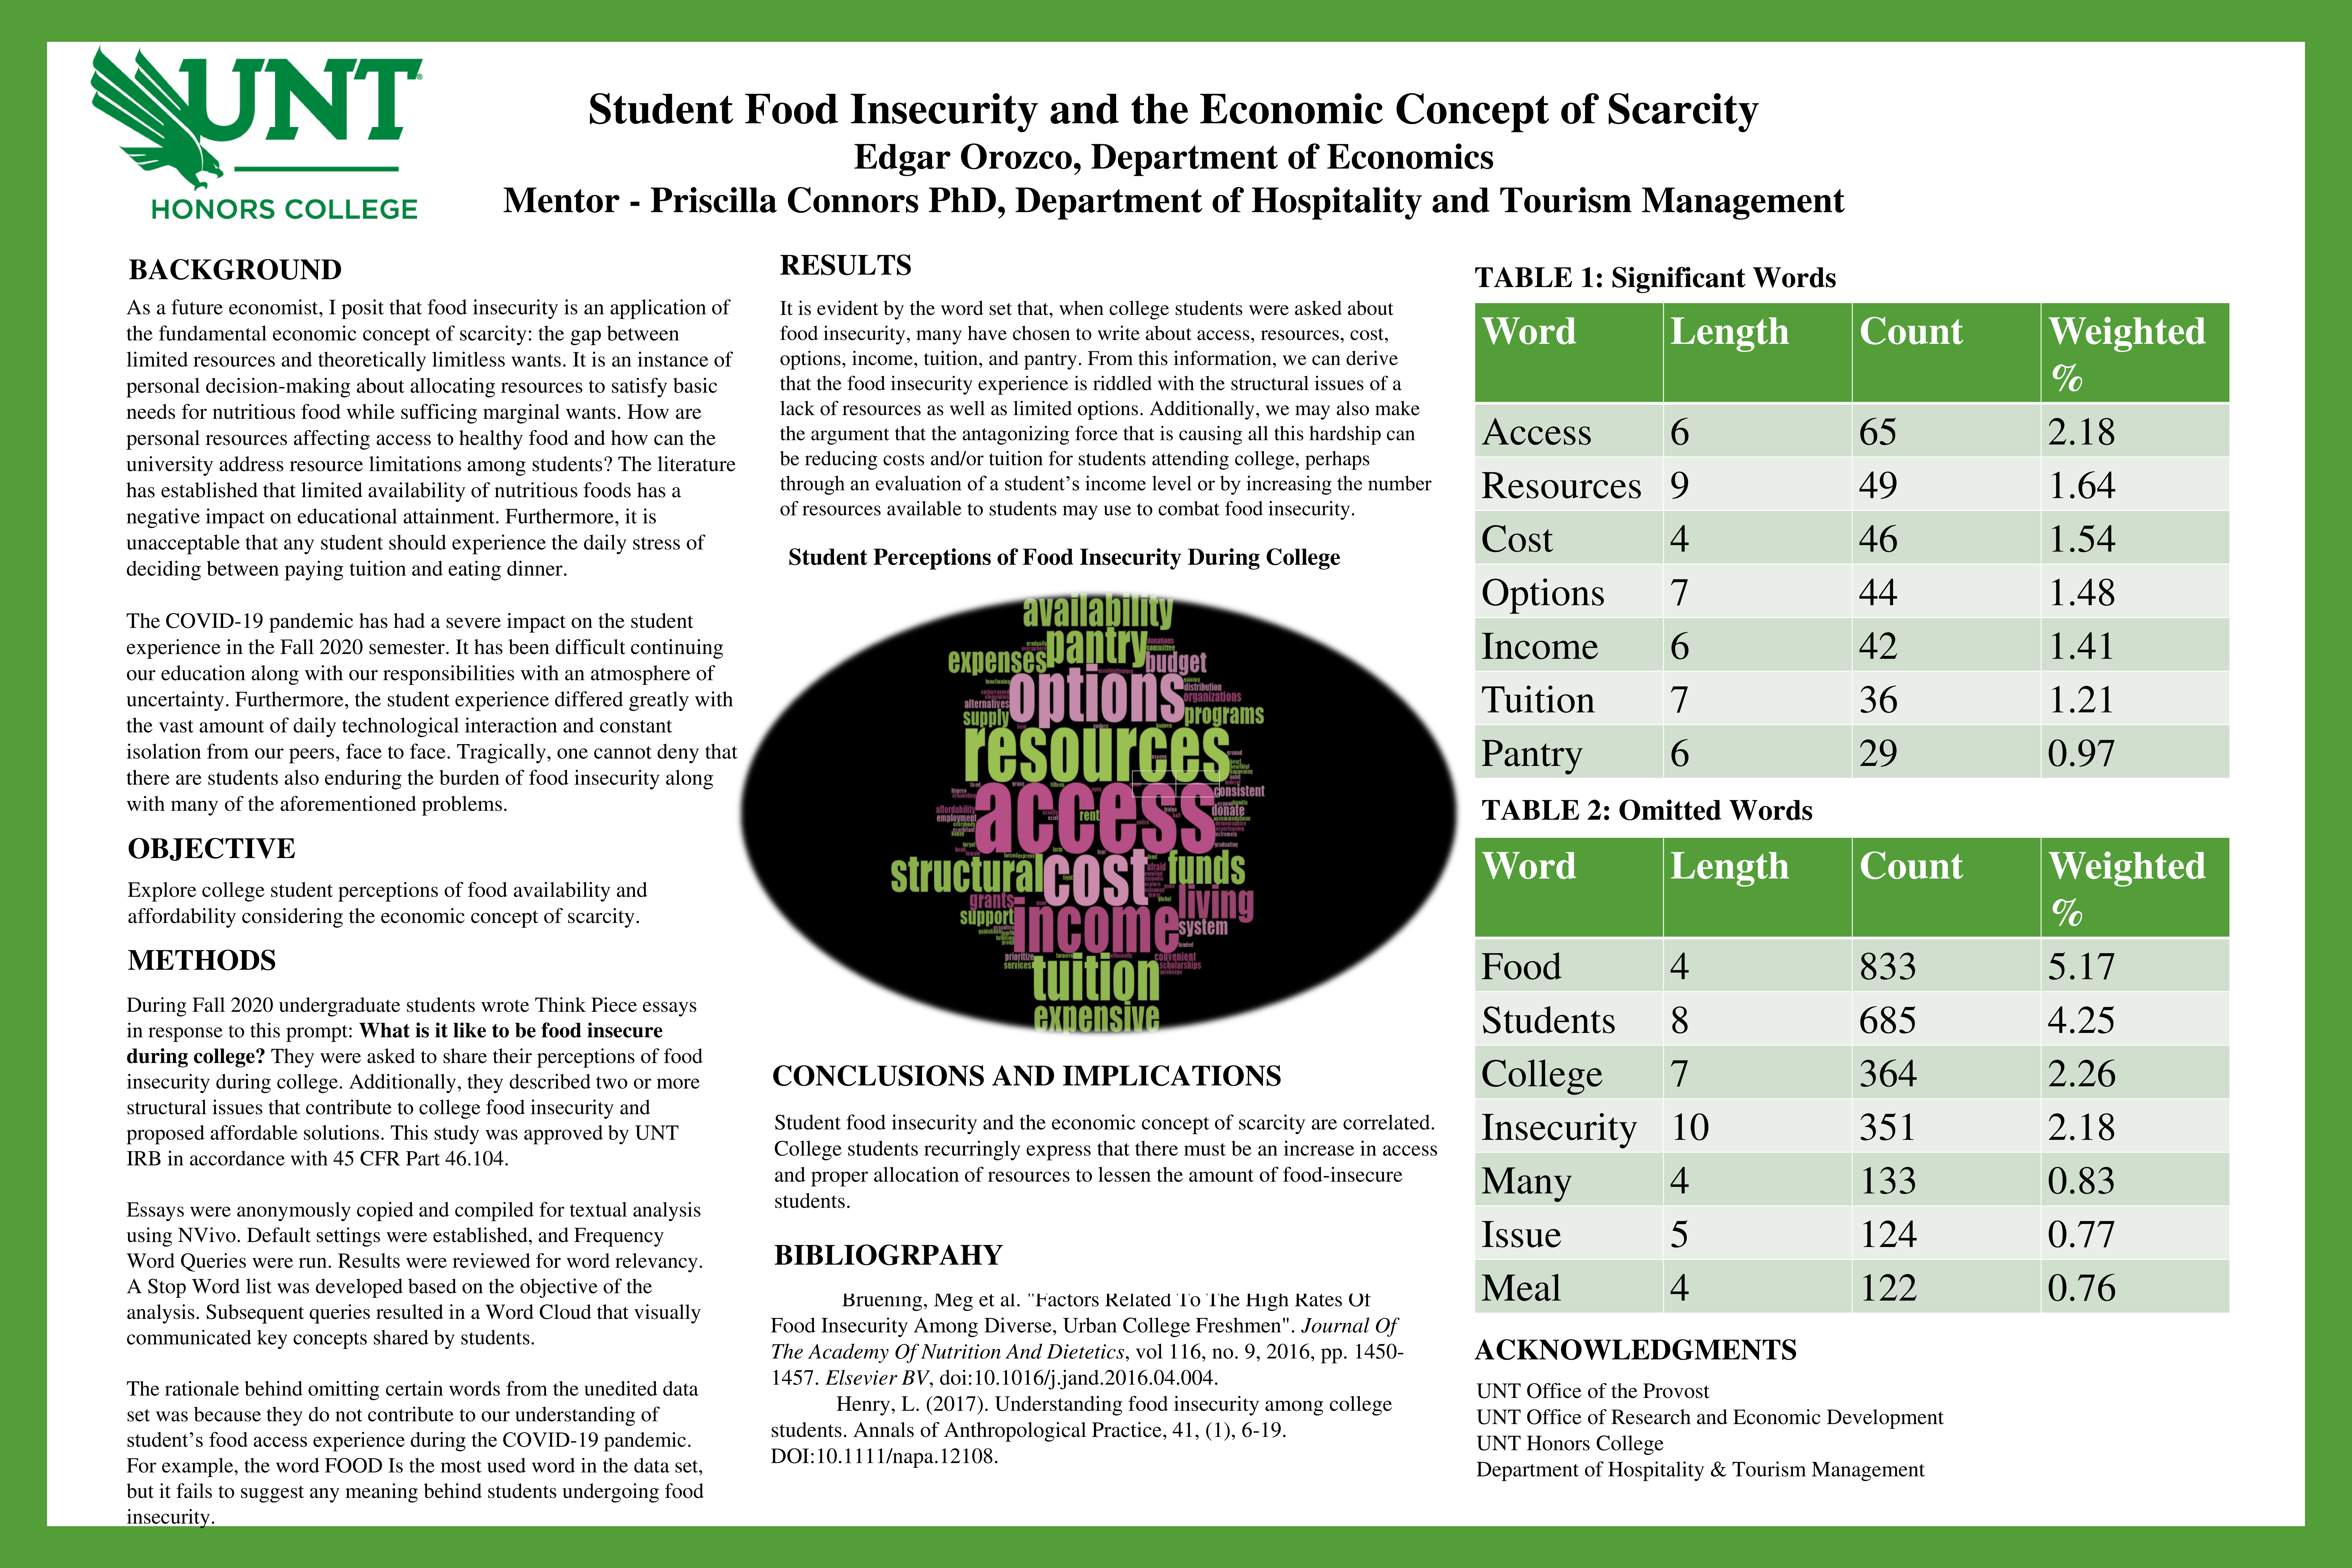 Student Food Insecurity and the Economic Concept of Scarcity